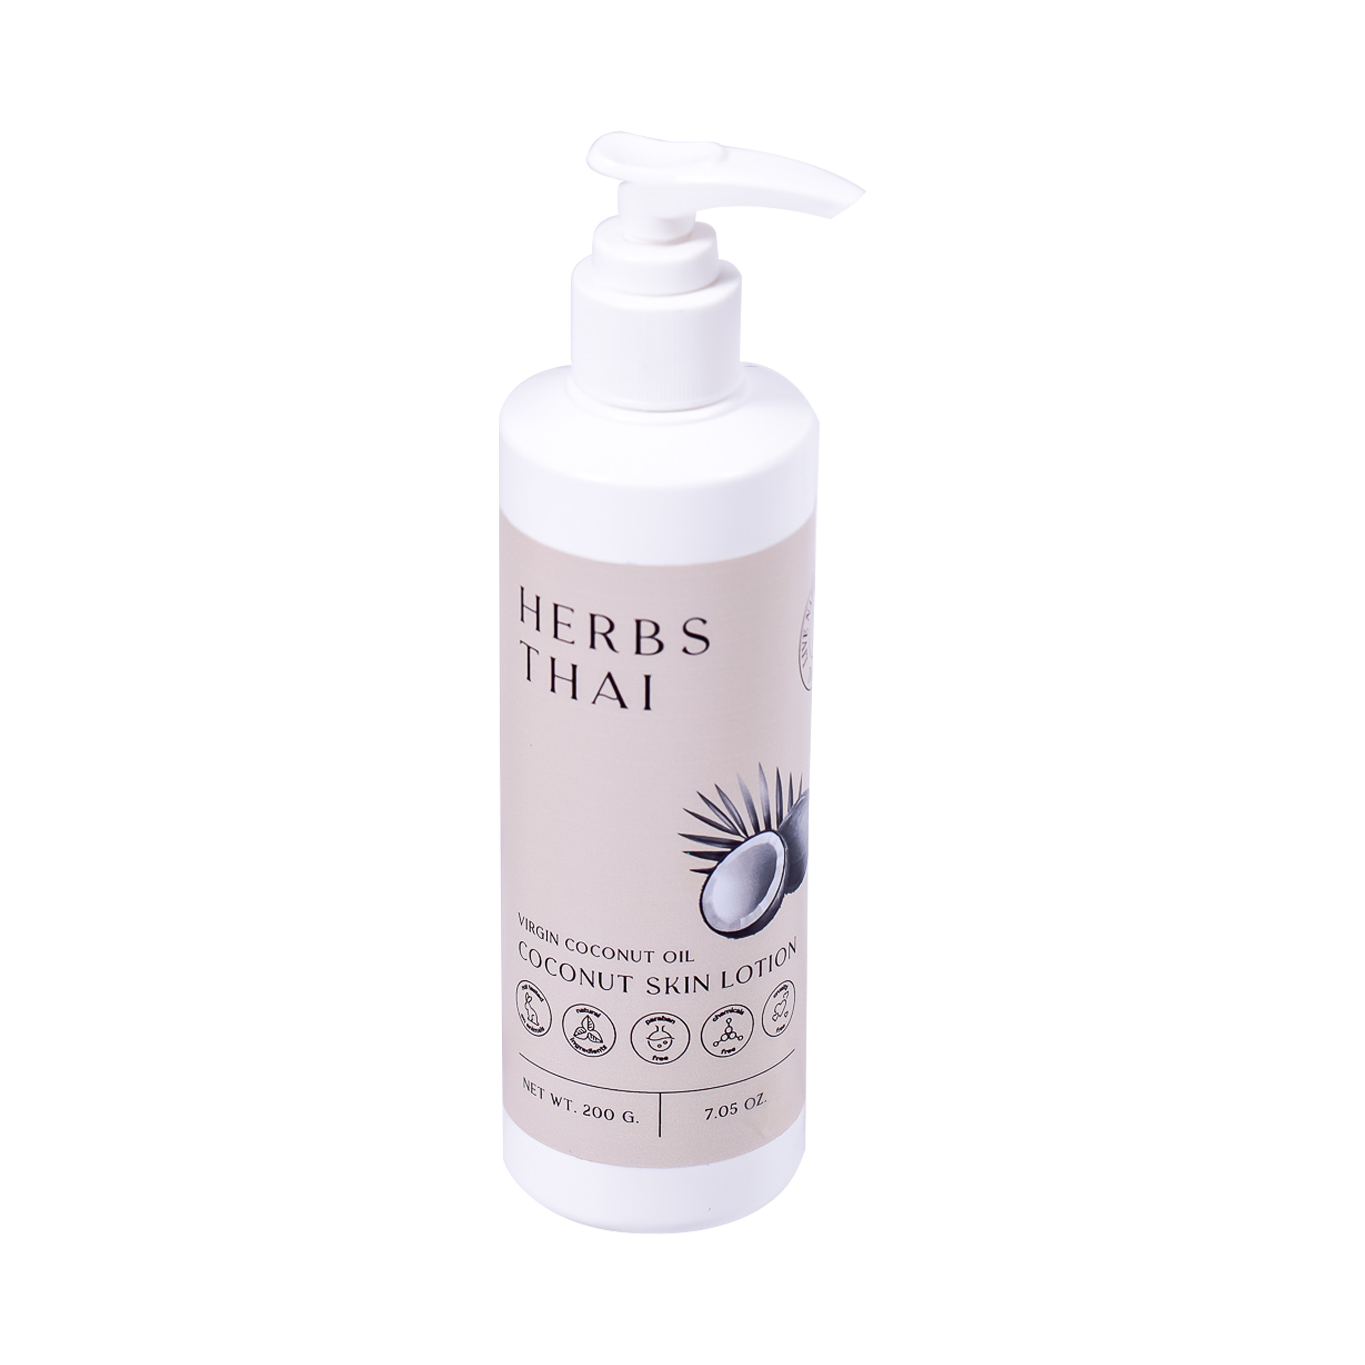 Herbs Thai Body Lotion with Coconut Oil